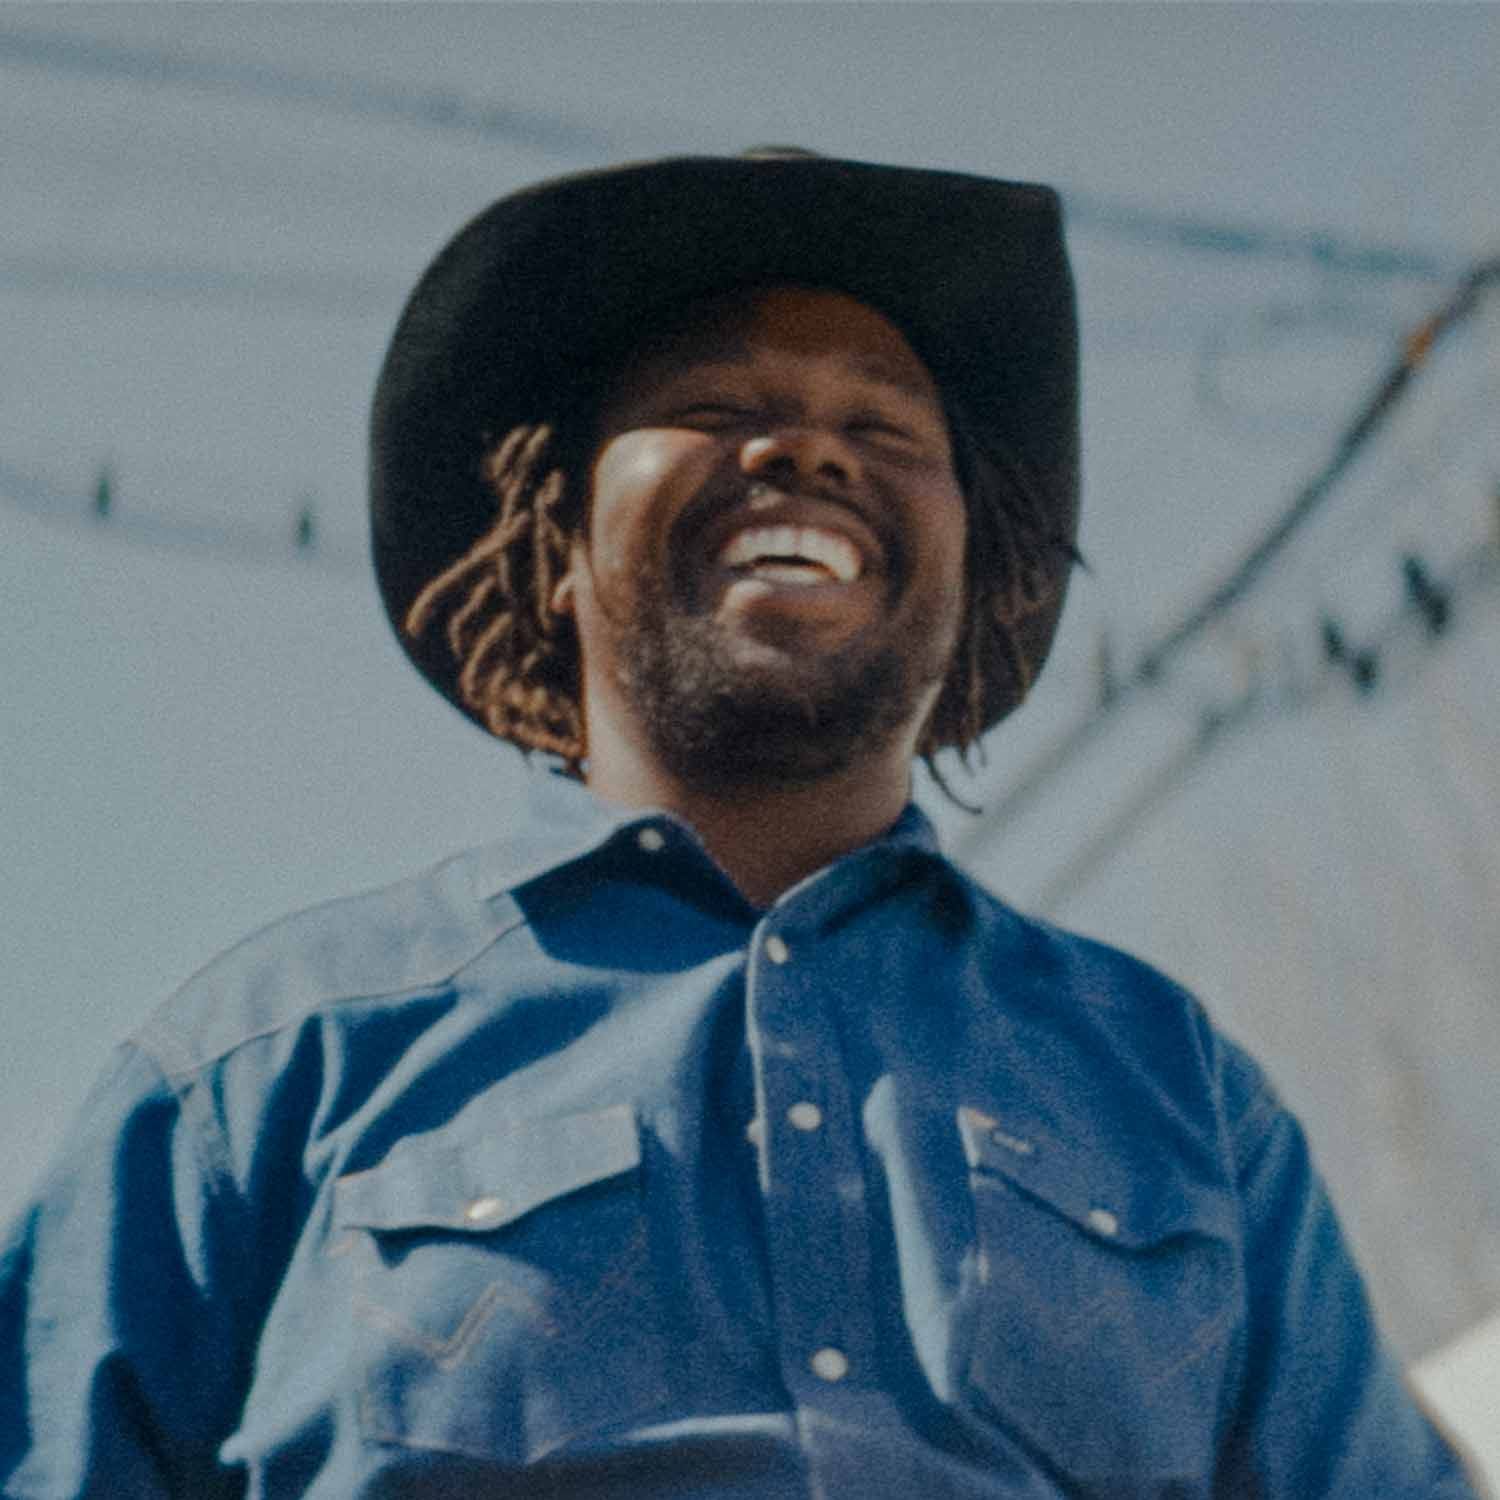 A man in cowboy hat smiling